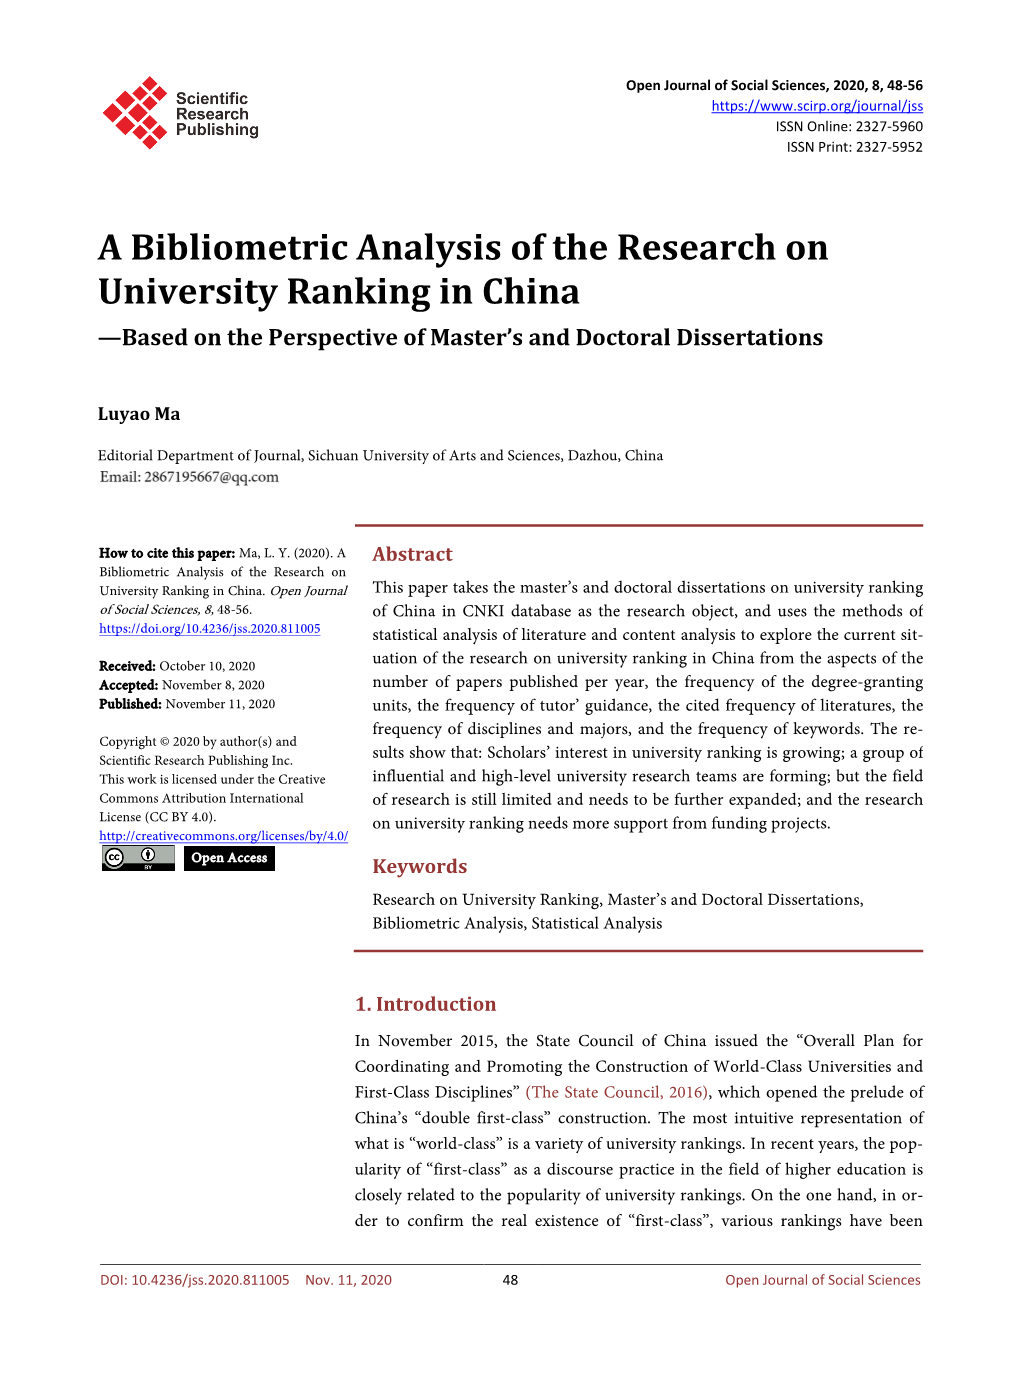 A Bibliometric Analysis of the Research on University Ranking in China —Based on the Perspective of Master’S and Doctoral Dissertations